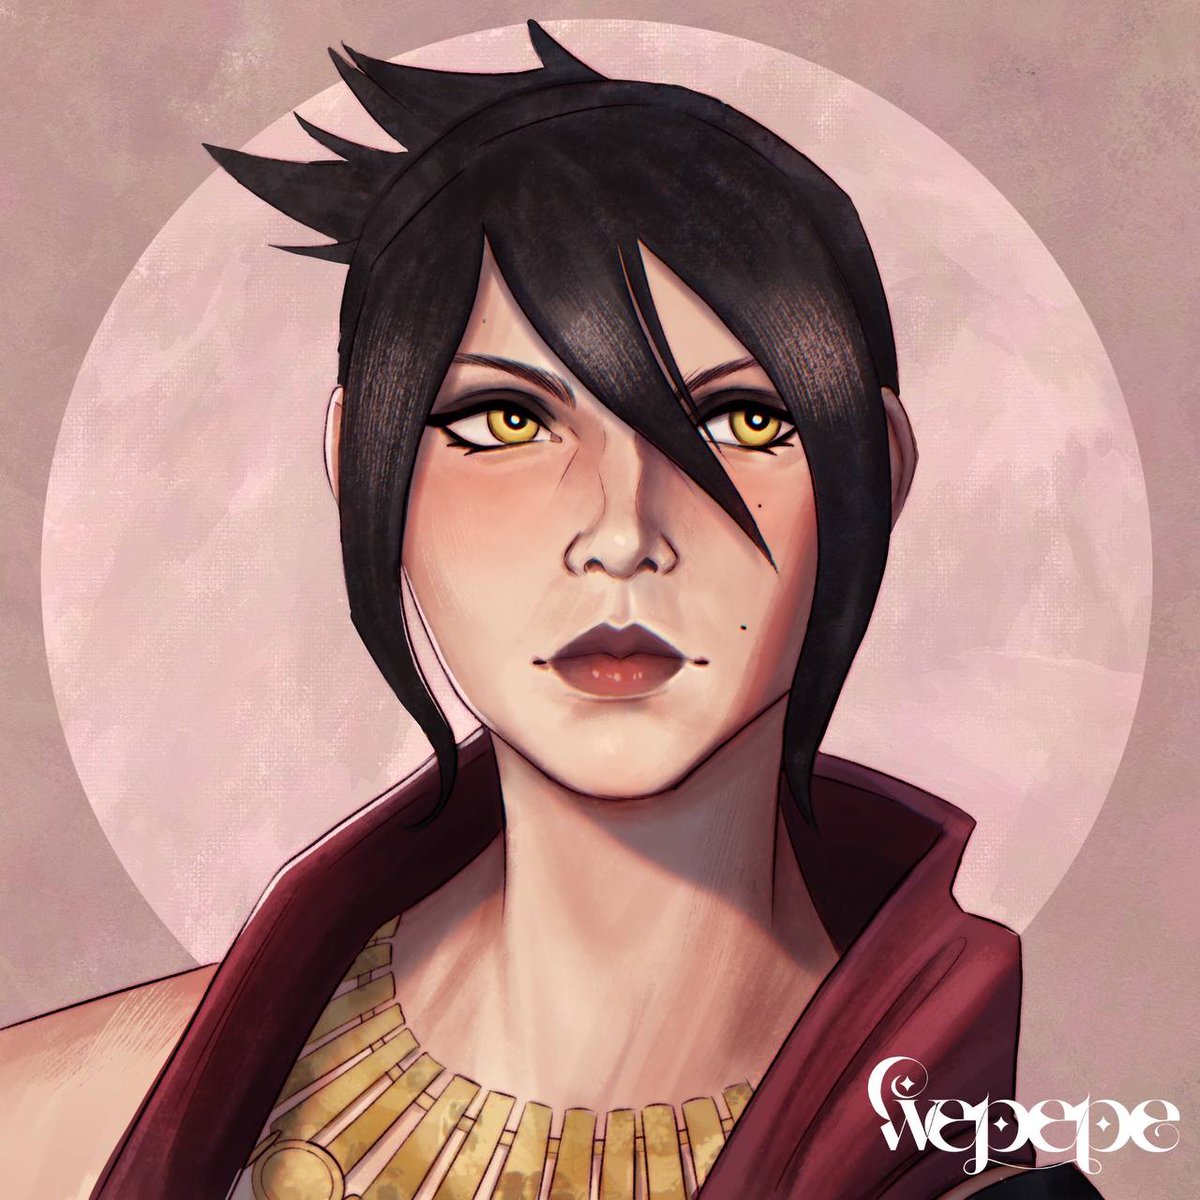 While we're waiting for Dragon Age Dreadwolf, I want to draw every companions. Let's start from DAO. Morrigan. Do you she'll show up again in the next game?